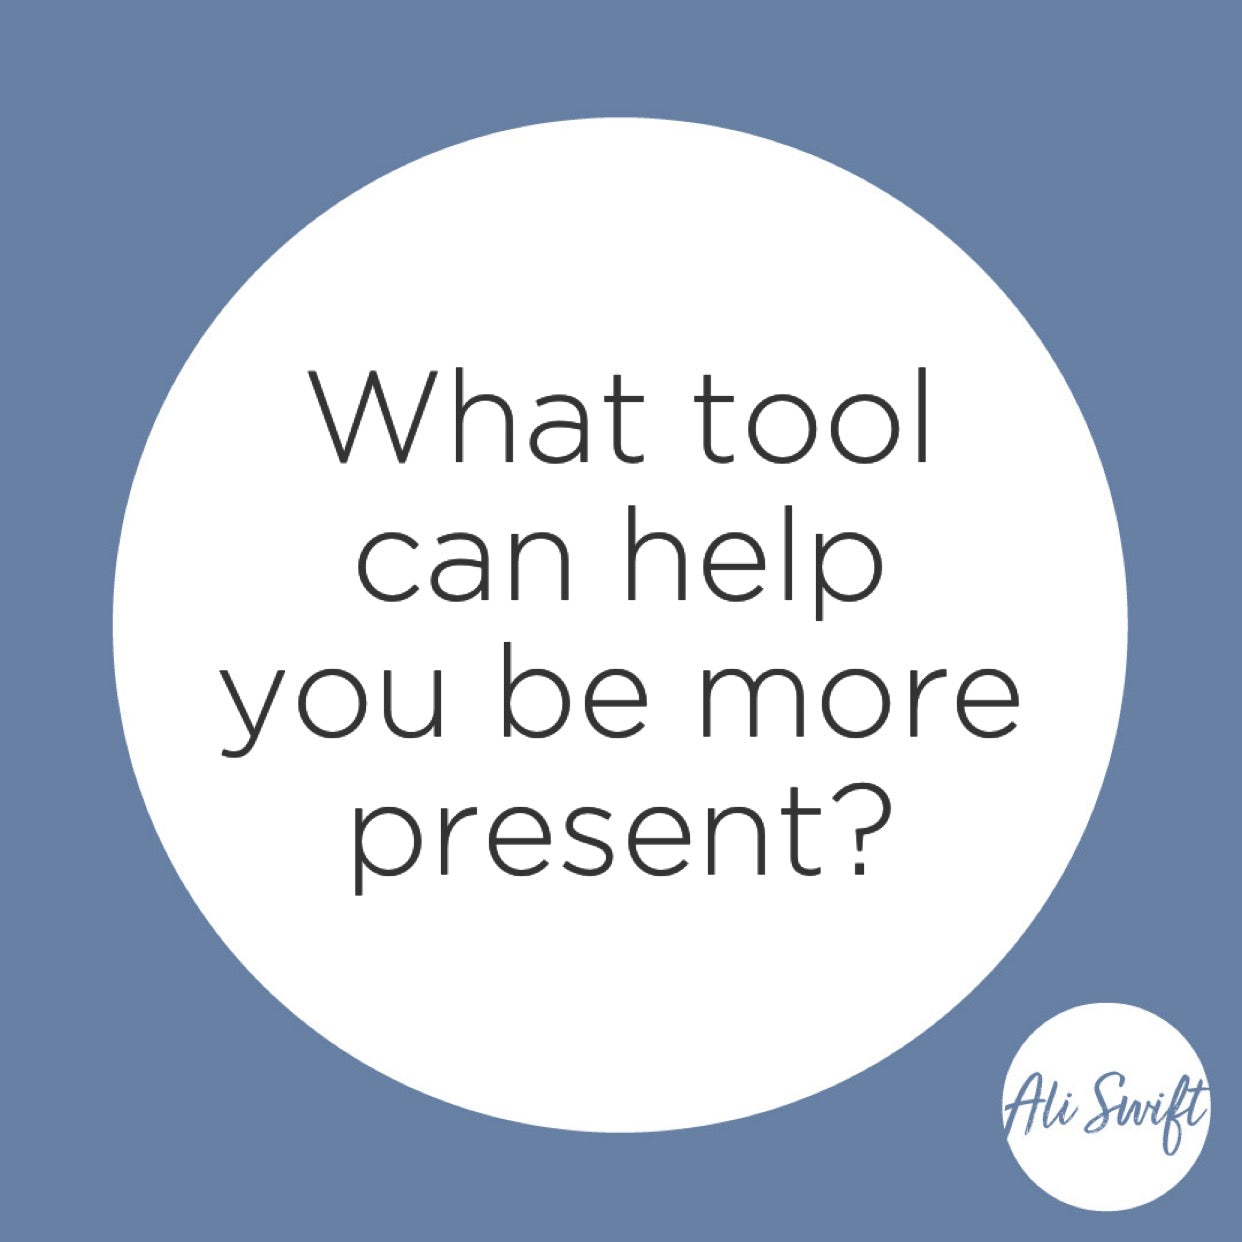 A TOOL THAT CAN HELP US STAY AND DEAL WITH THE PRESENT MOMENT